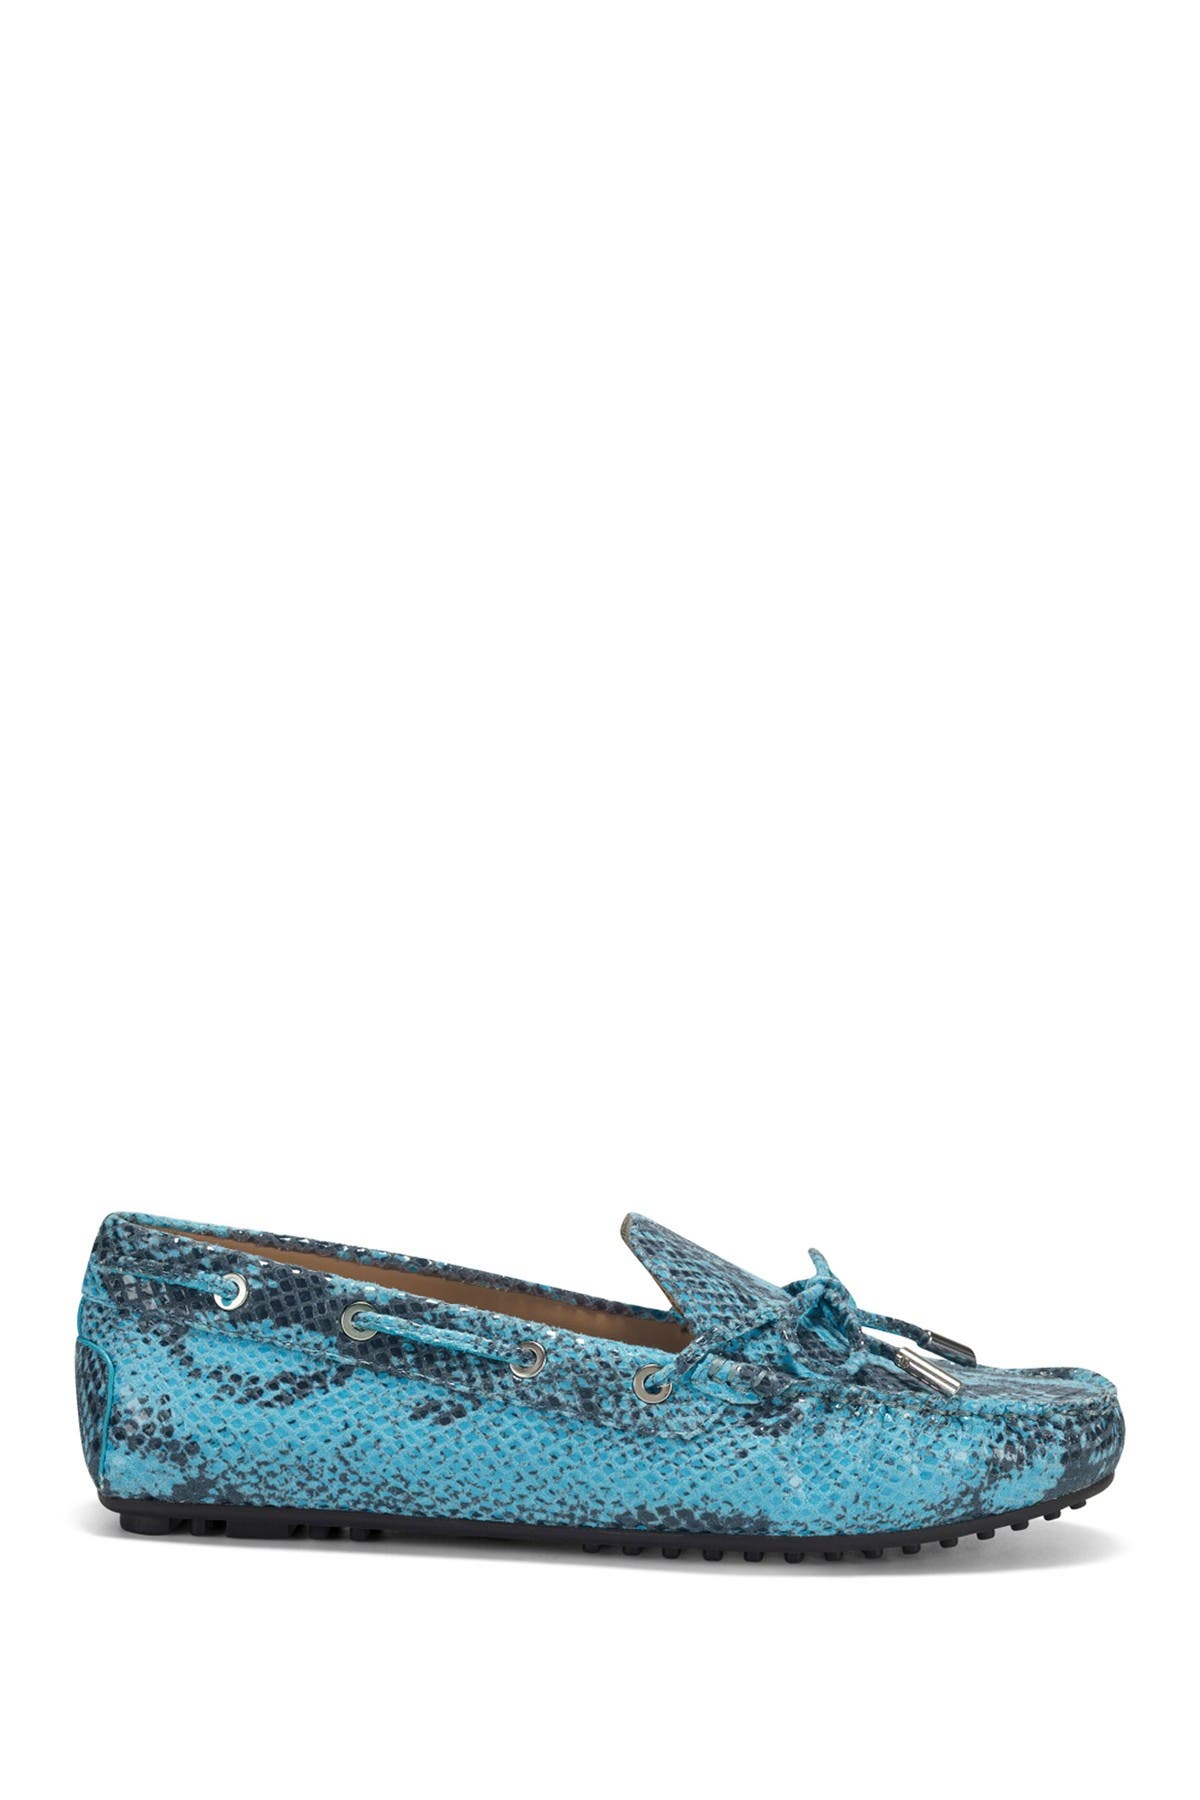 Aerosoles Boater Moccasin In Turquoise